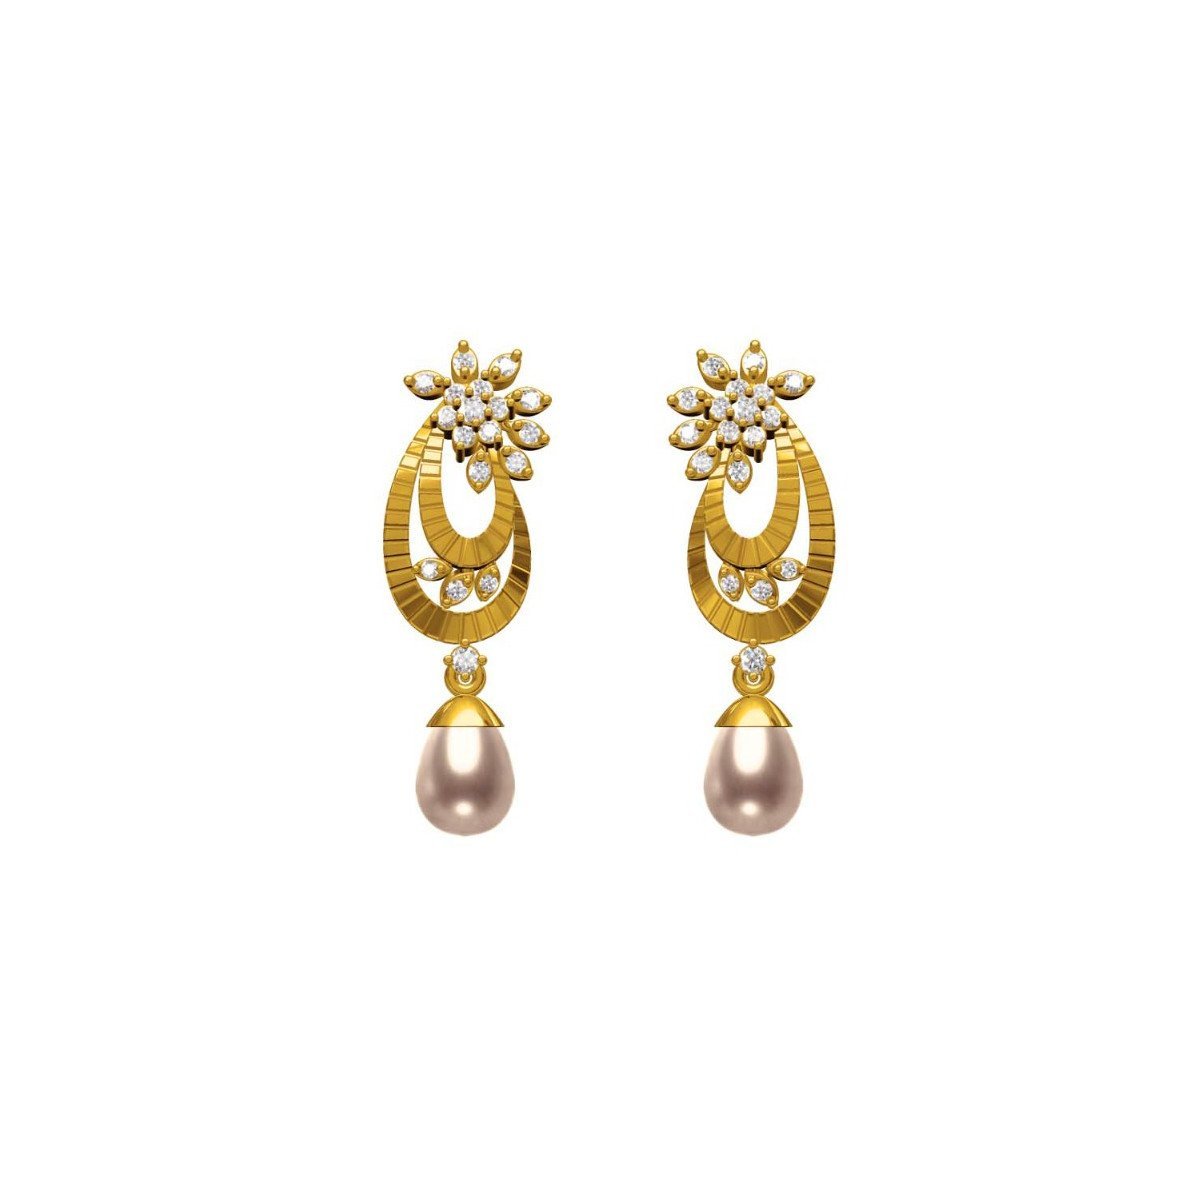 Traditional traditional pearl and gold earrings designs - Simple Craft Idea